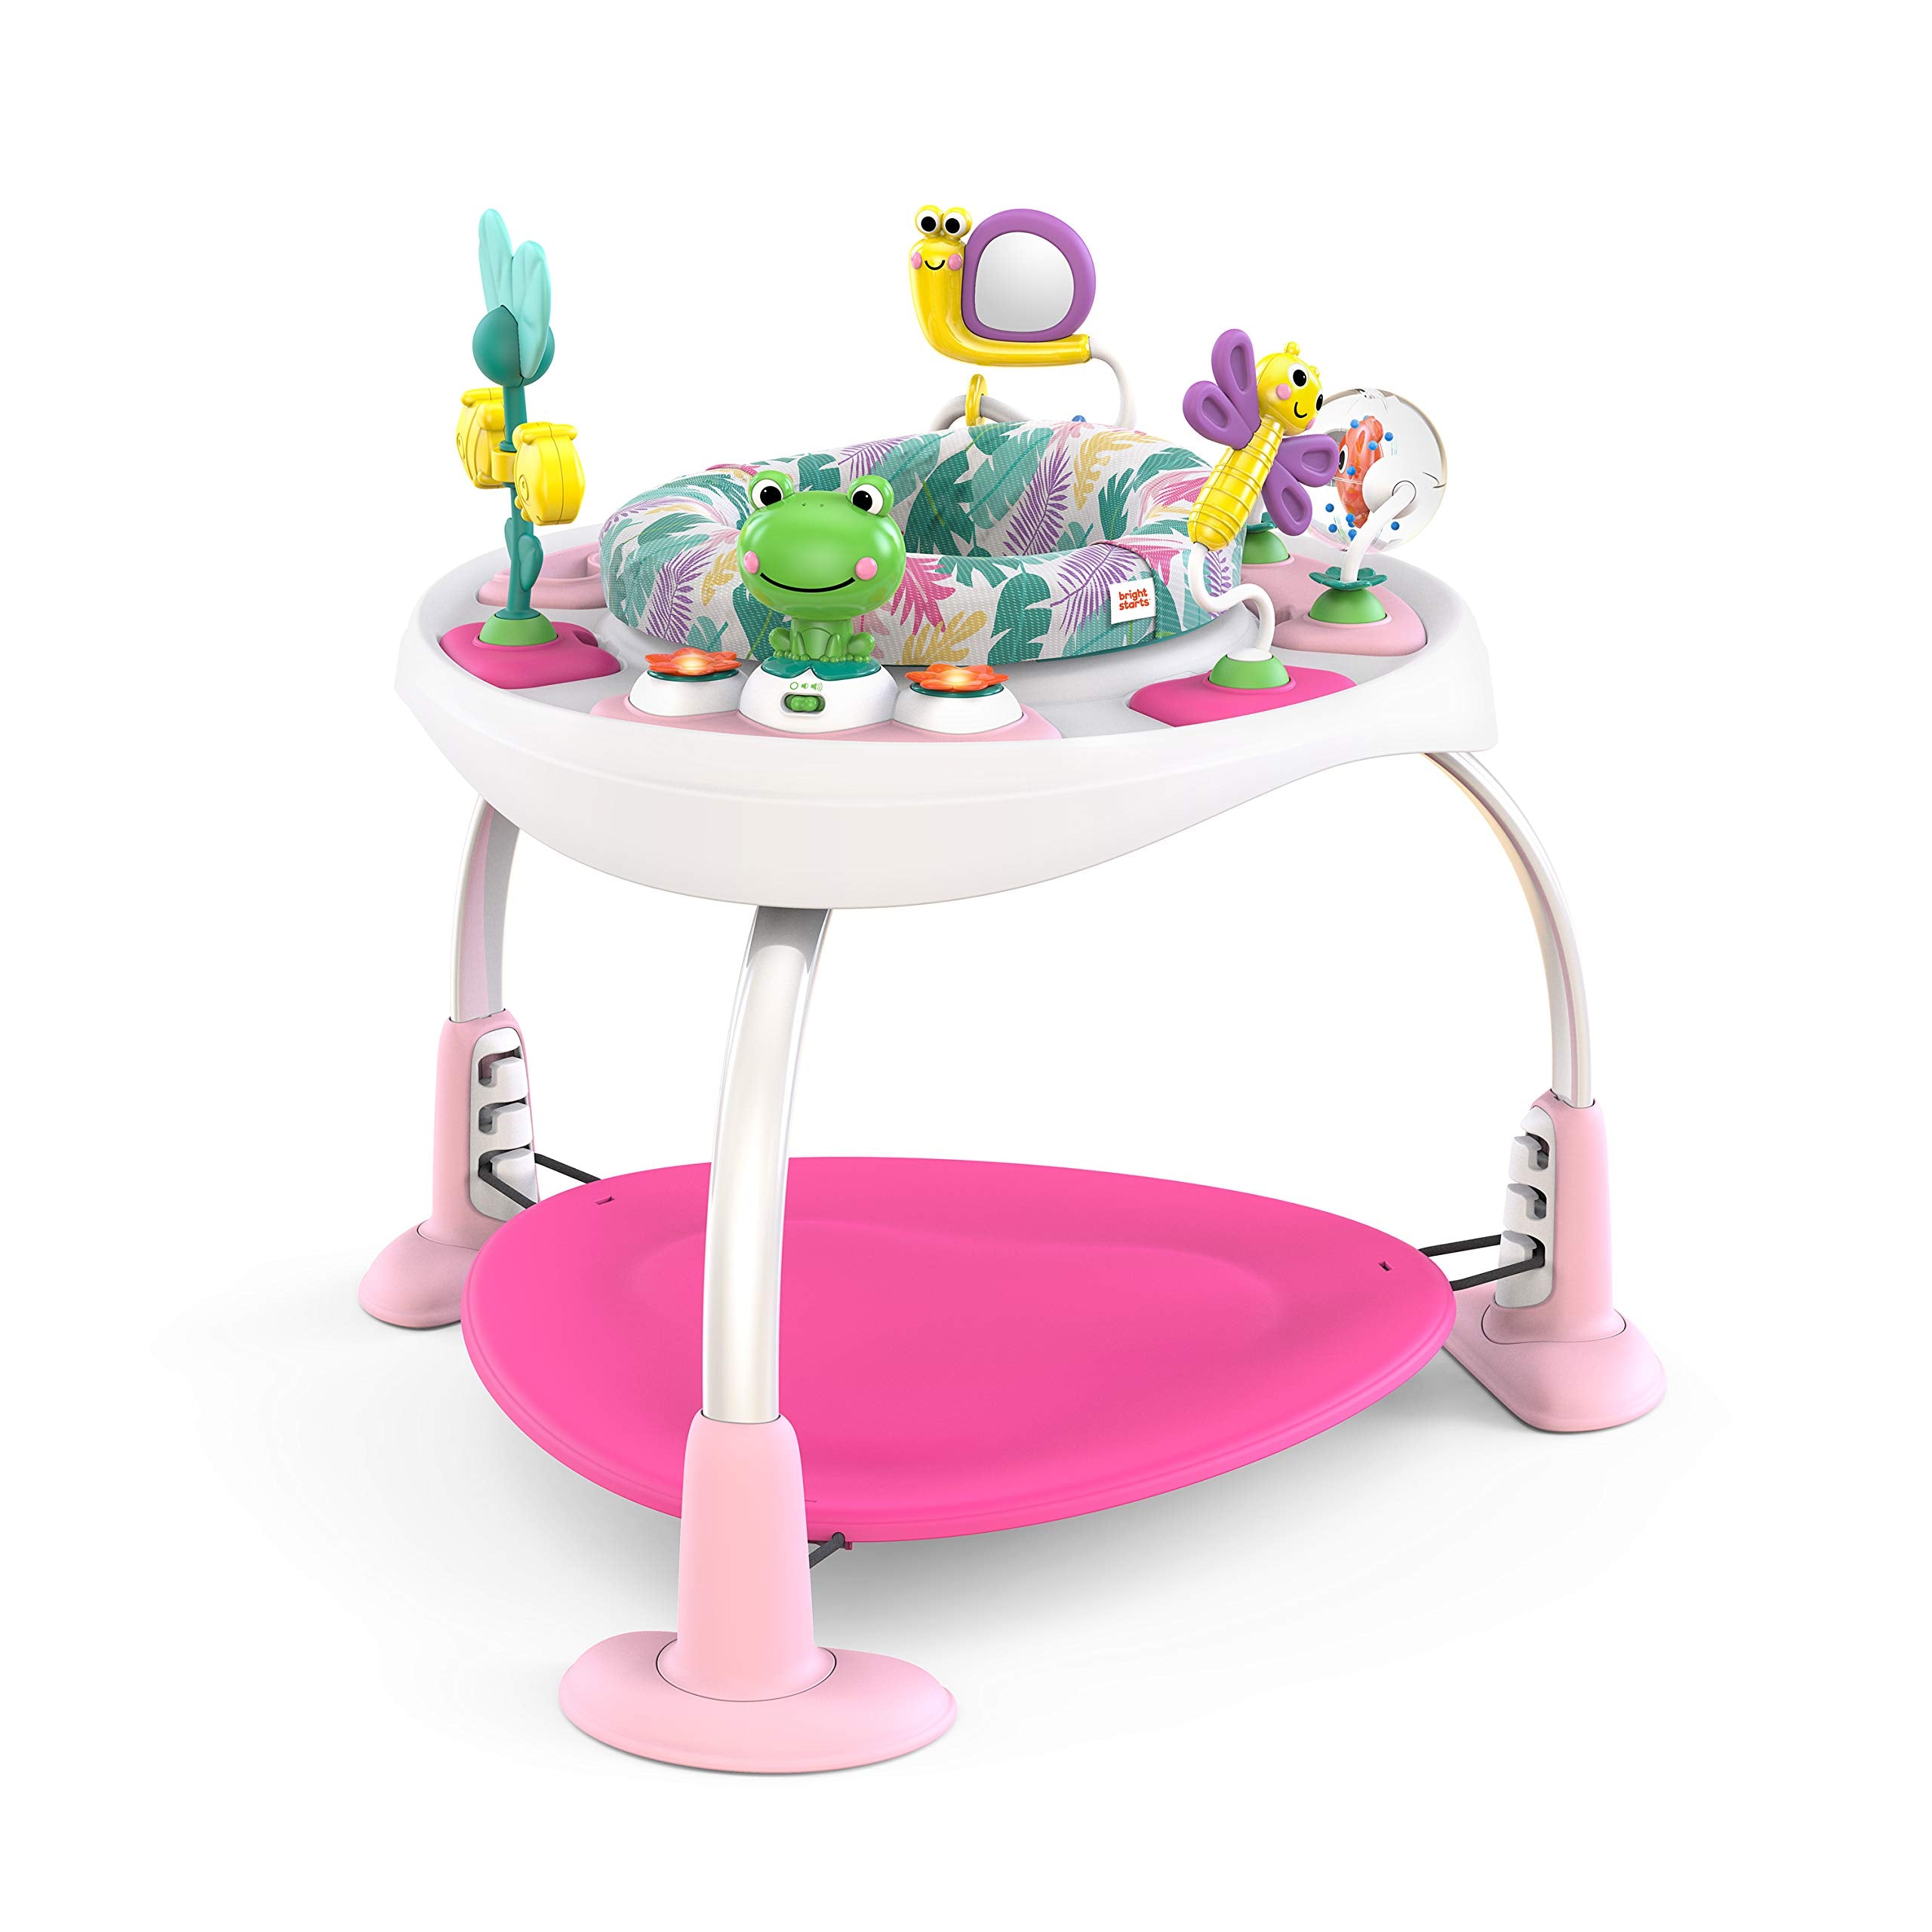 Bright Starts, Bounce Bounce Baby 2-in-1 Activity Center Jumper and Table - Playful Palms with 7 Interactive Toys, Adjustable Height, Storage Bag, 360° Rotation, Ages 6 Months +, Pink